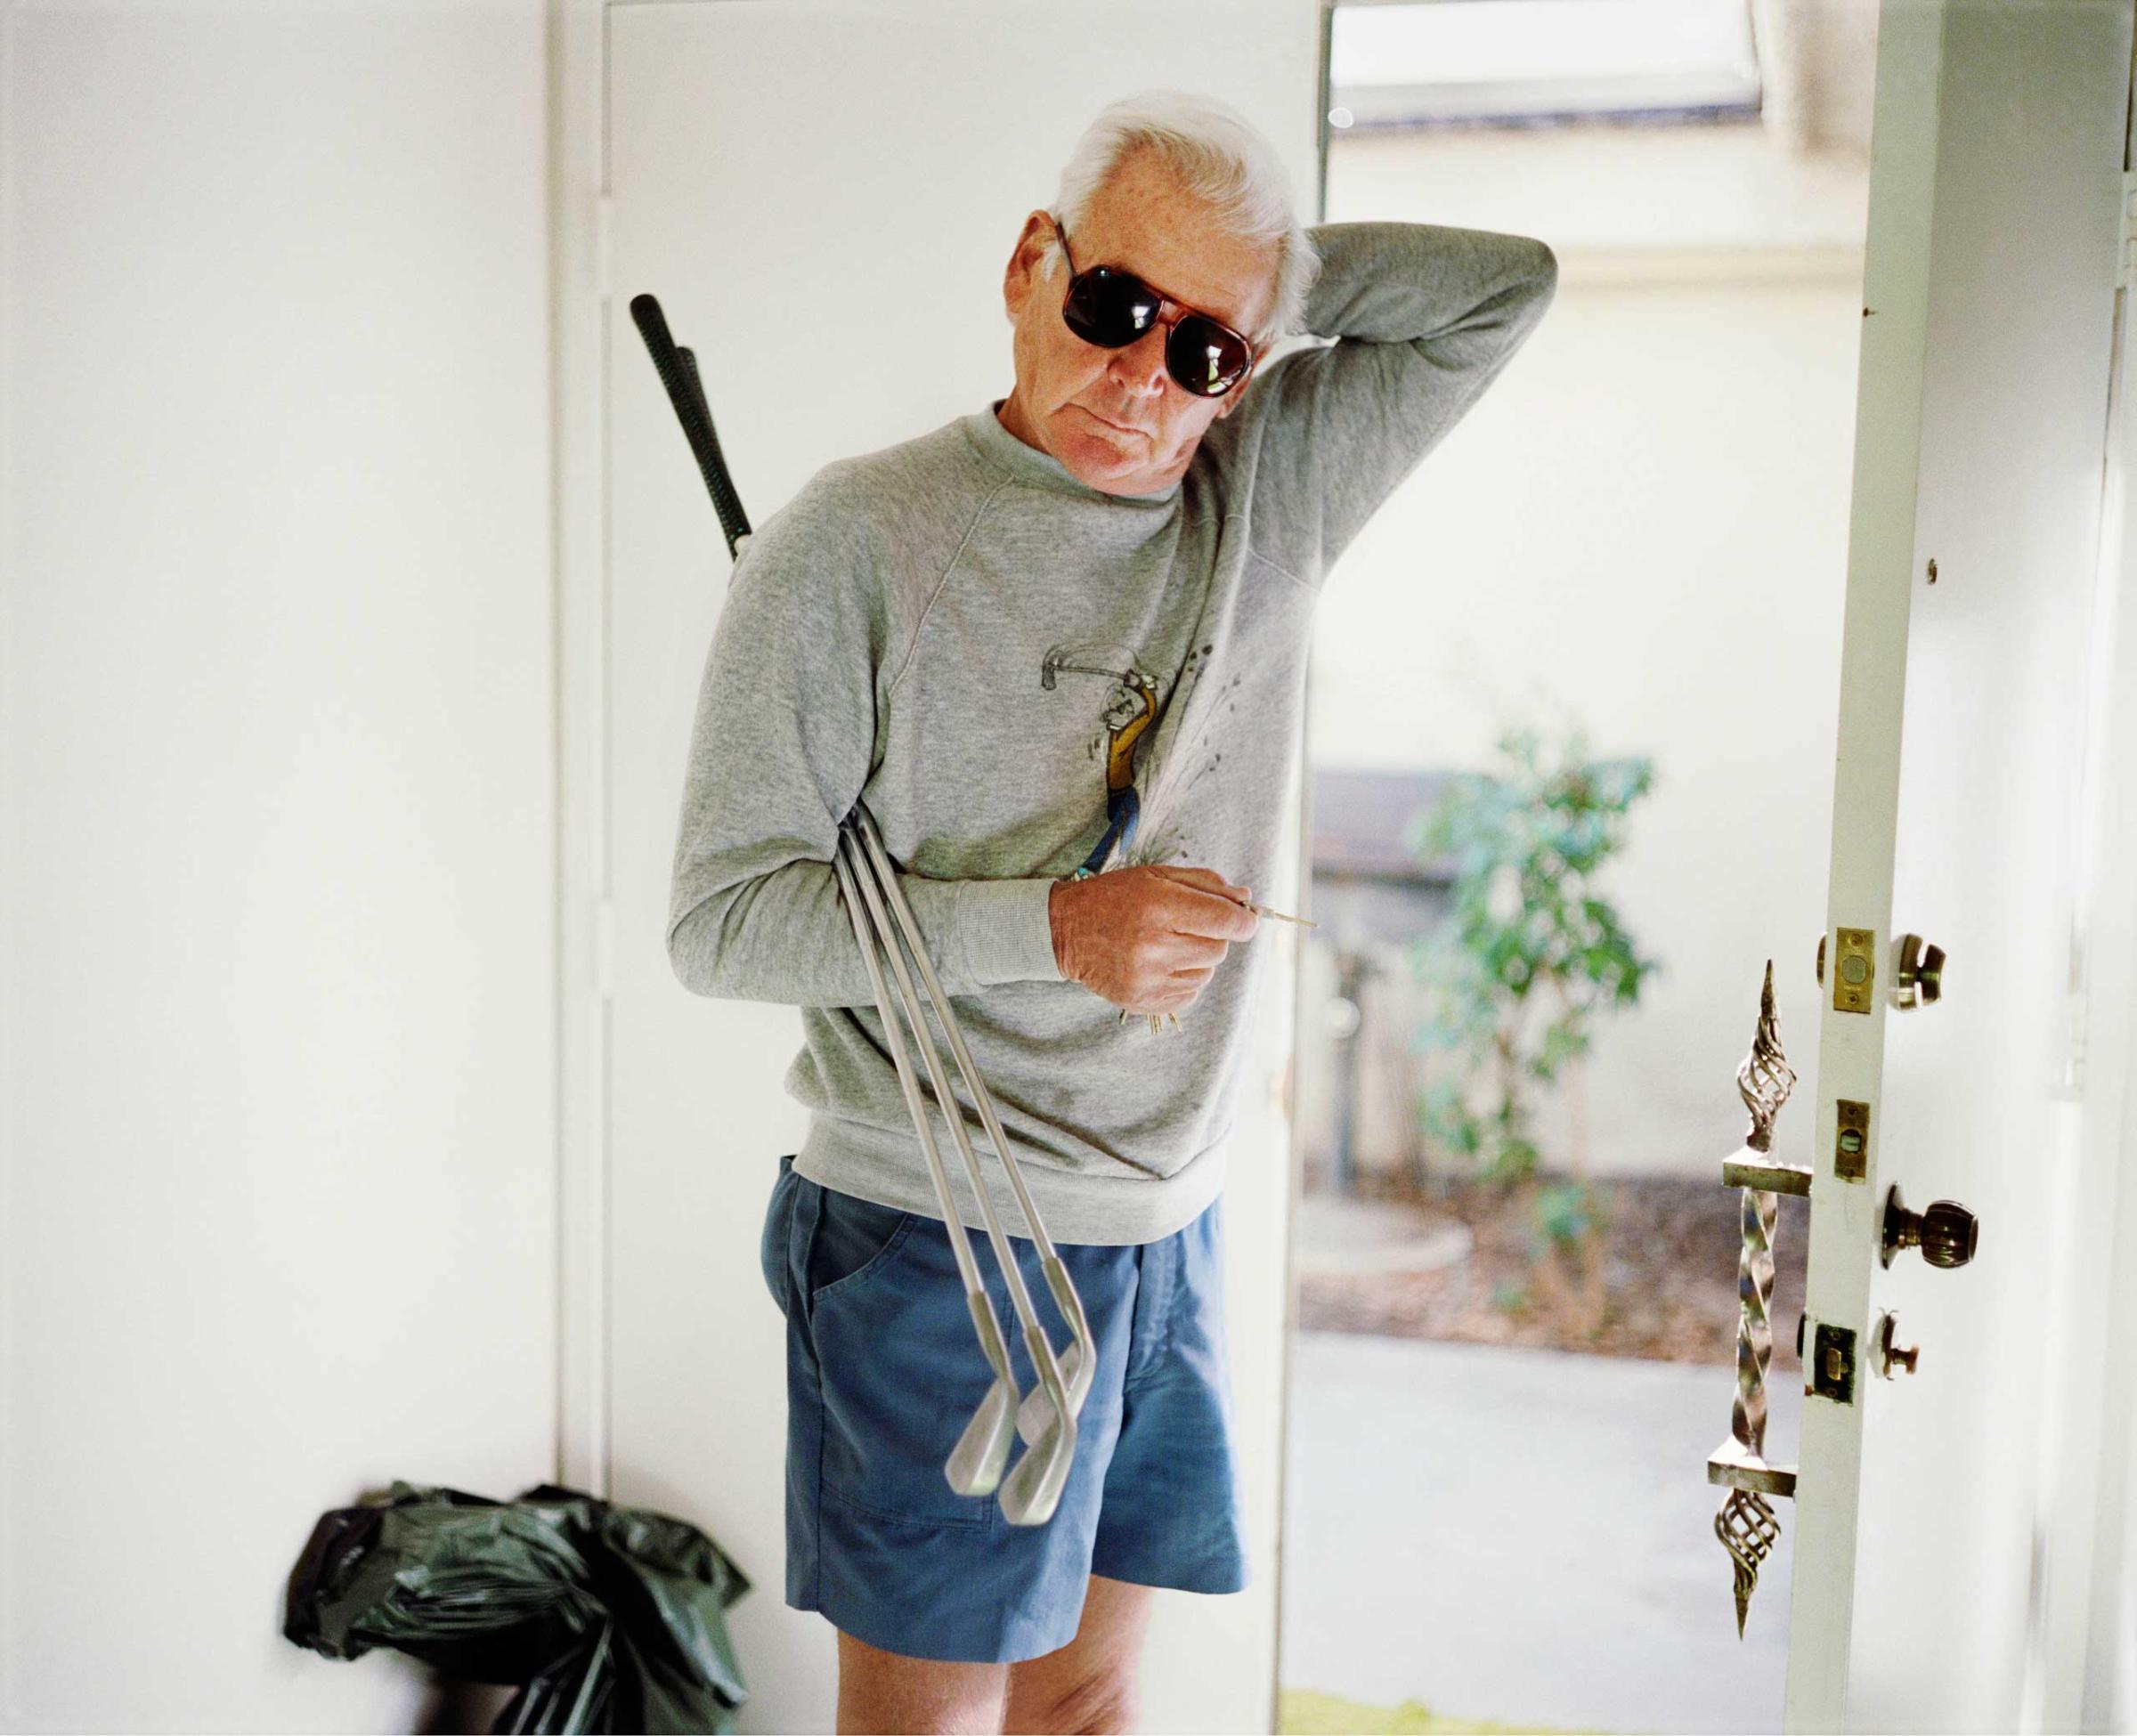 Dad with Golf Clubs, 1987, from the series Pictures From Home